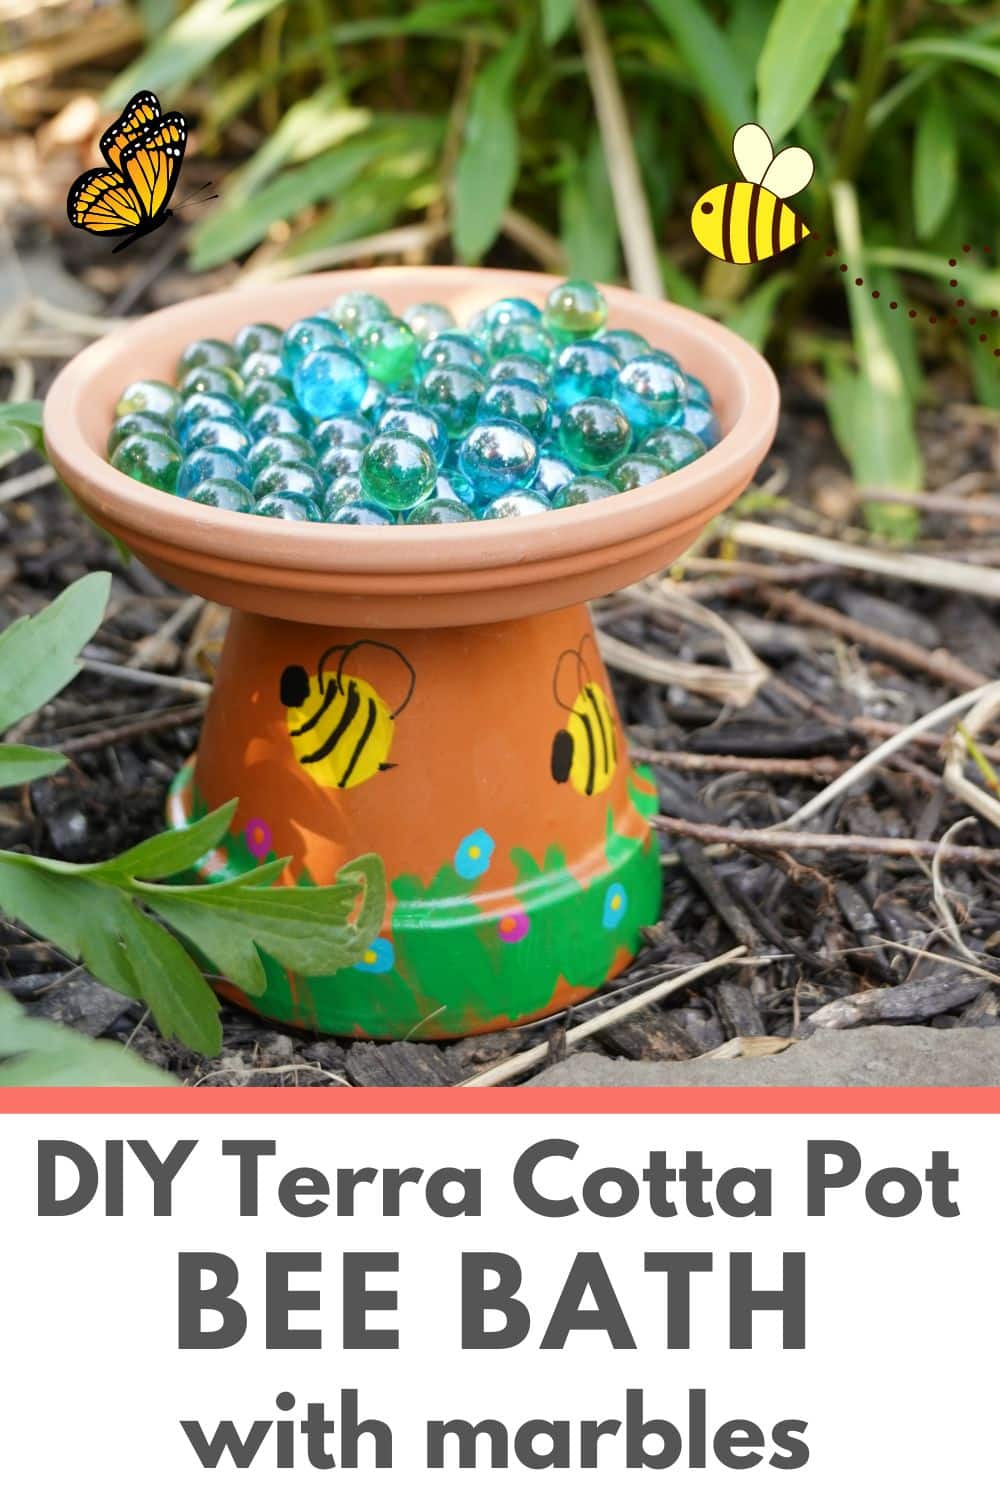 title "how to make a terra cotta pot bee bath with marbles" image of terra cotta bee bath in a garden